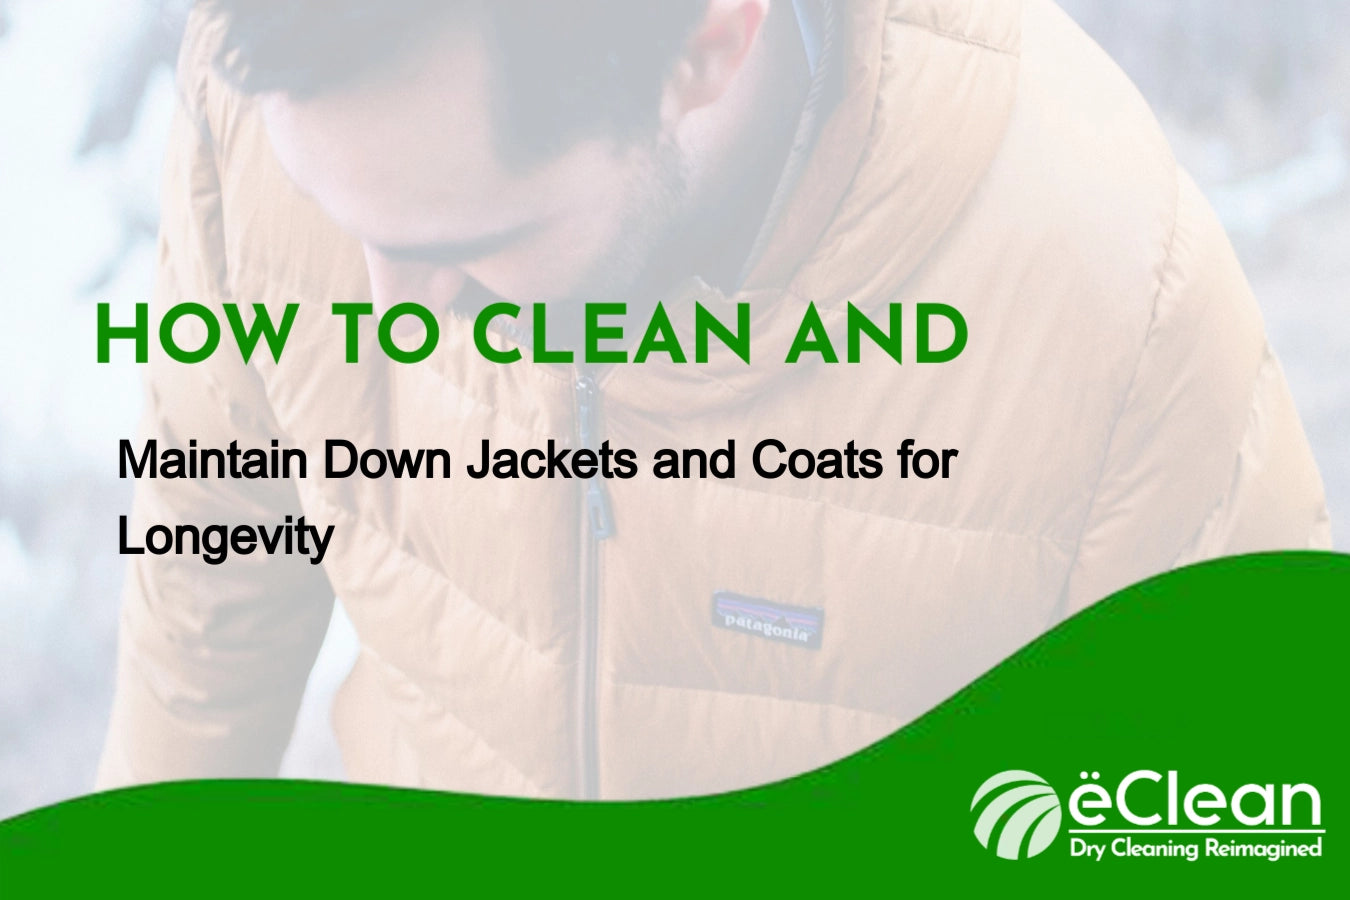 How to Clean and Maintain Down Jackets and Coats for Longevity